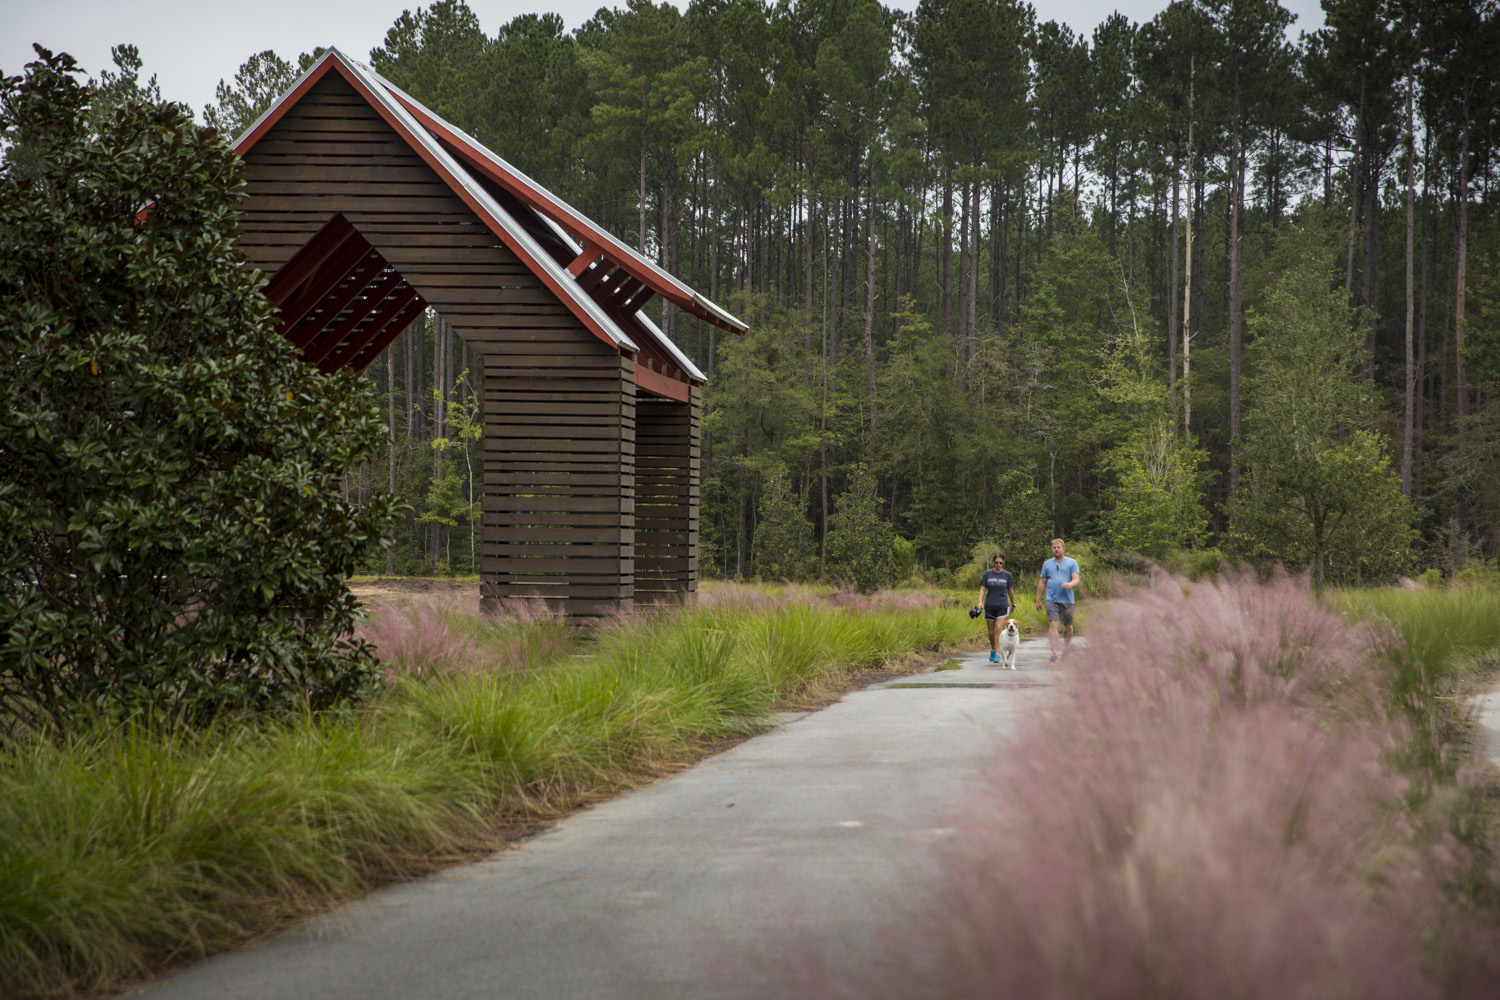 walking trail on a flat topography with a large wood sided pergola, dusty pink plantings and tall trees reminiscent of the low country flank all sides of a paved pathway with two people walking on it